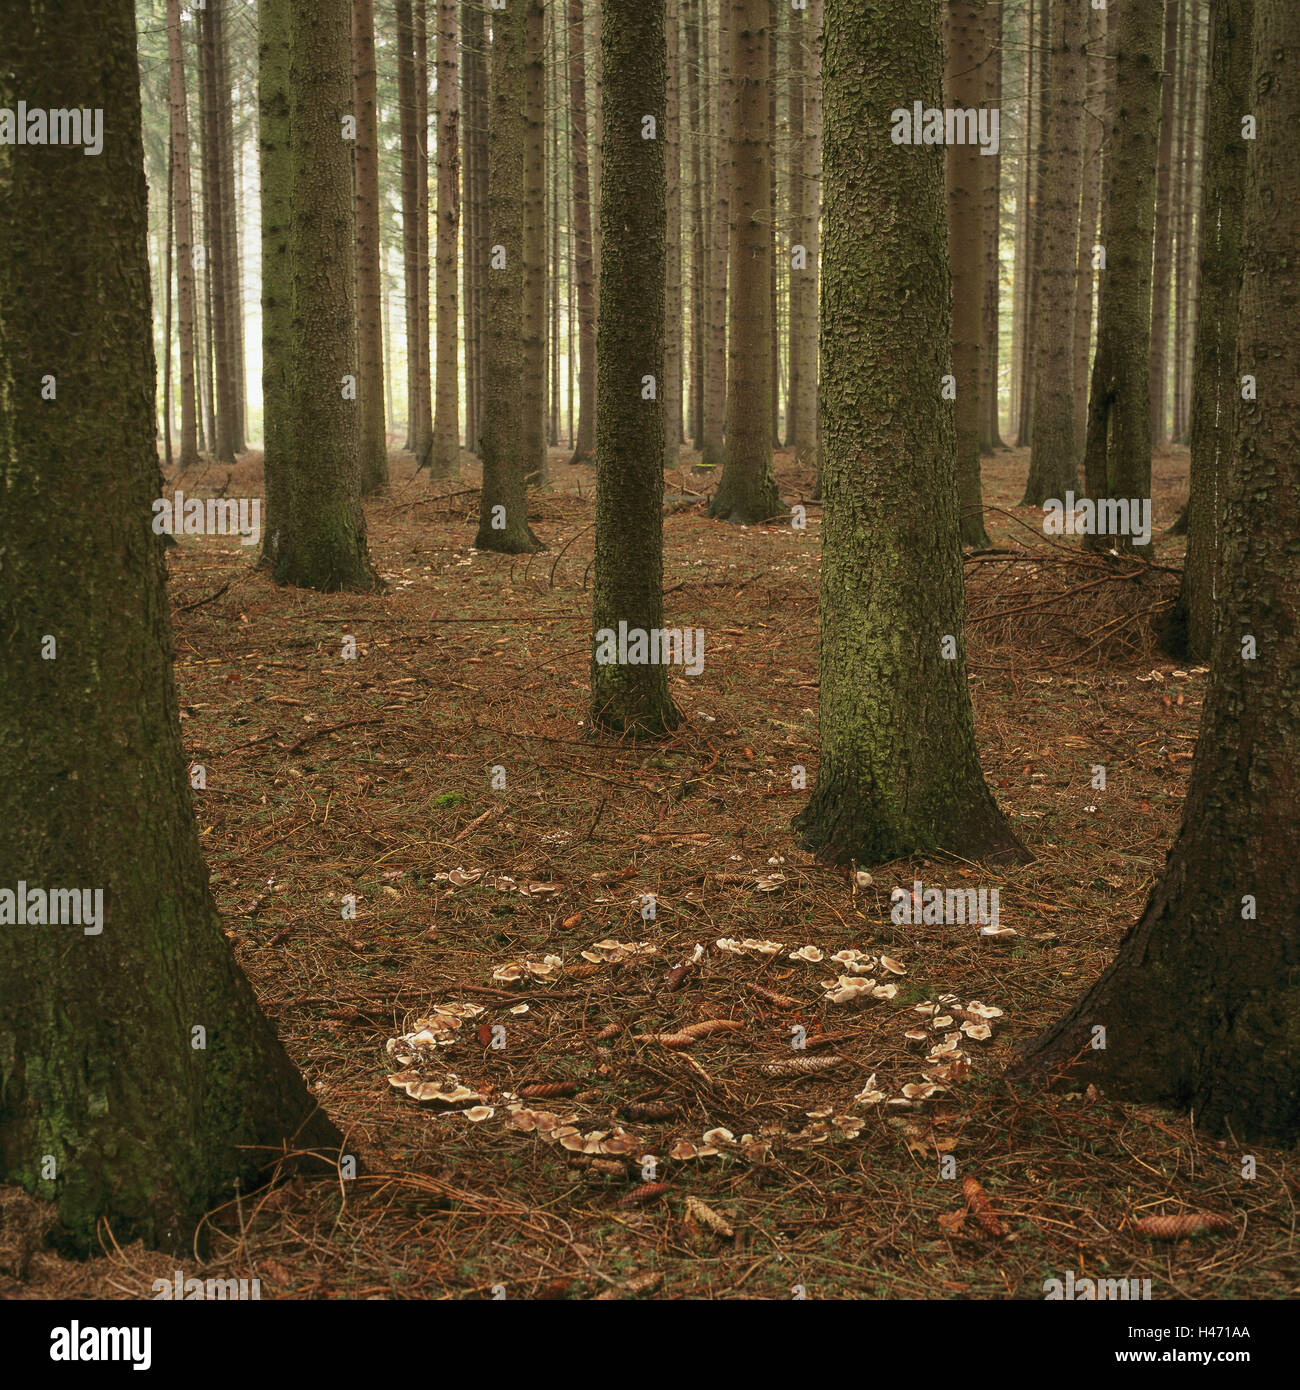 Wood, fungi, witch's ring, plants, trees, trunks, forest floor, forest fungi, fairy ring, array, aggregation, circularly, nature, deserted, Stock Photo